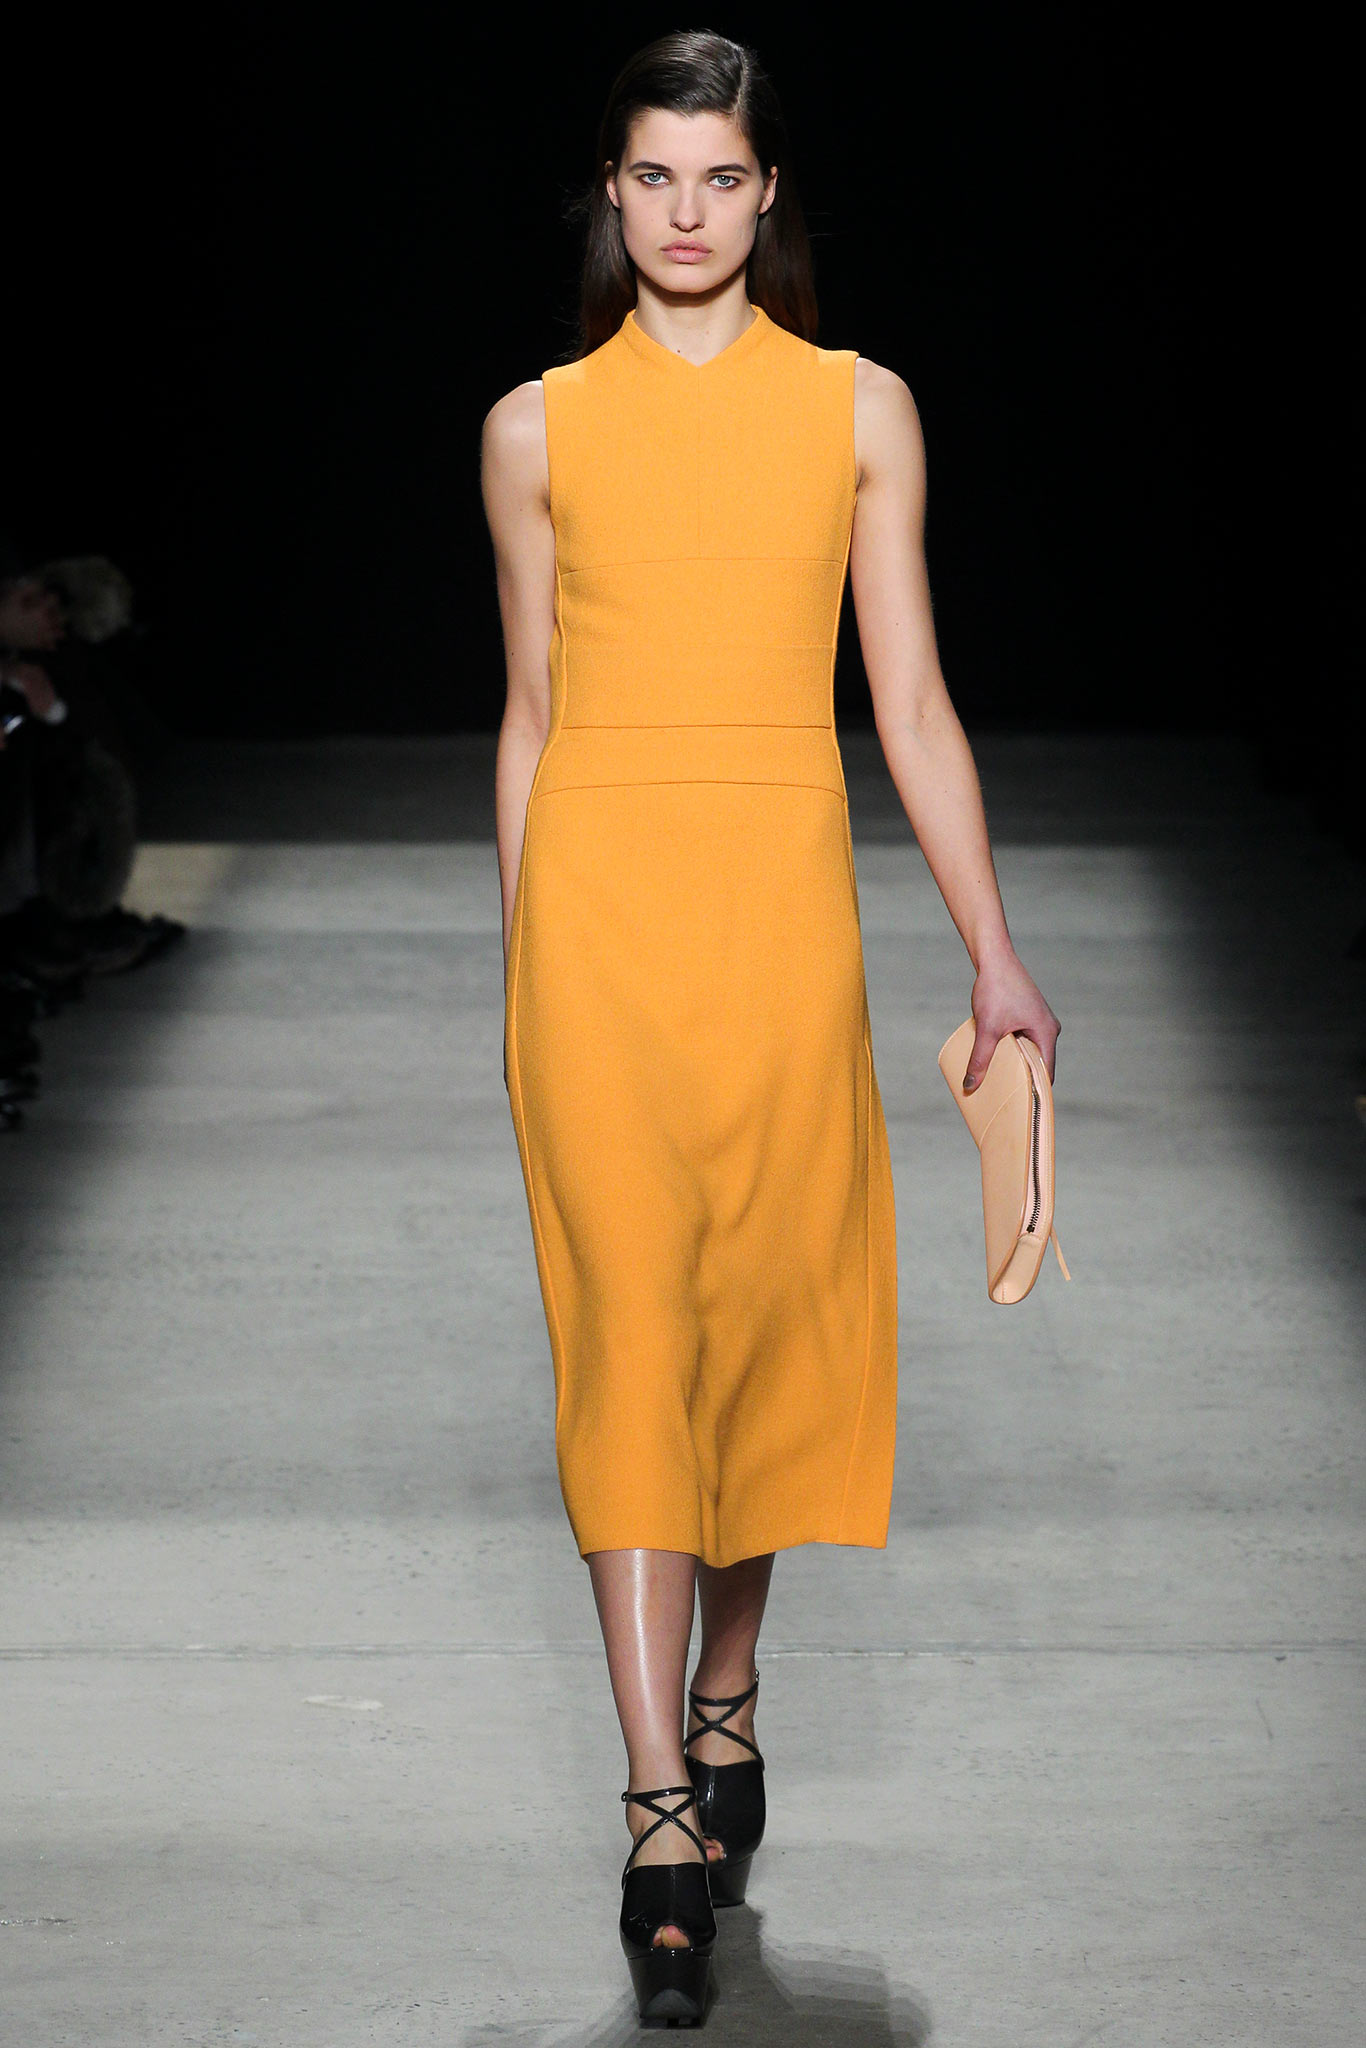 Narciso Rodriguez, Fall 2015 — Taryn Cox The Wife